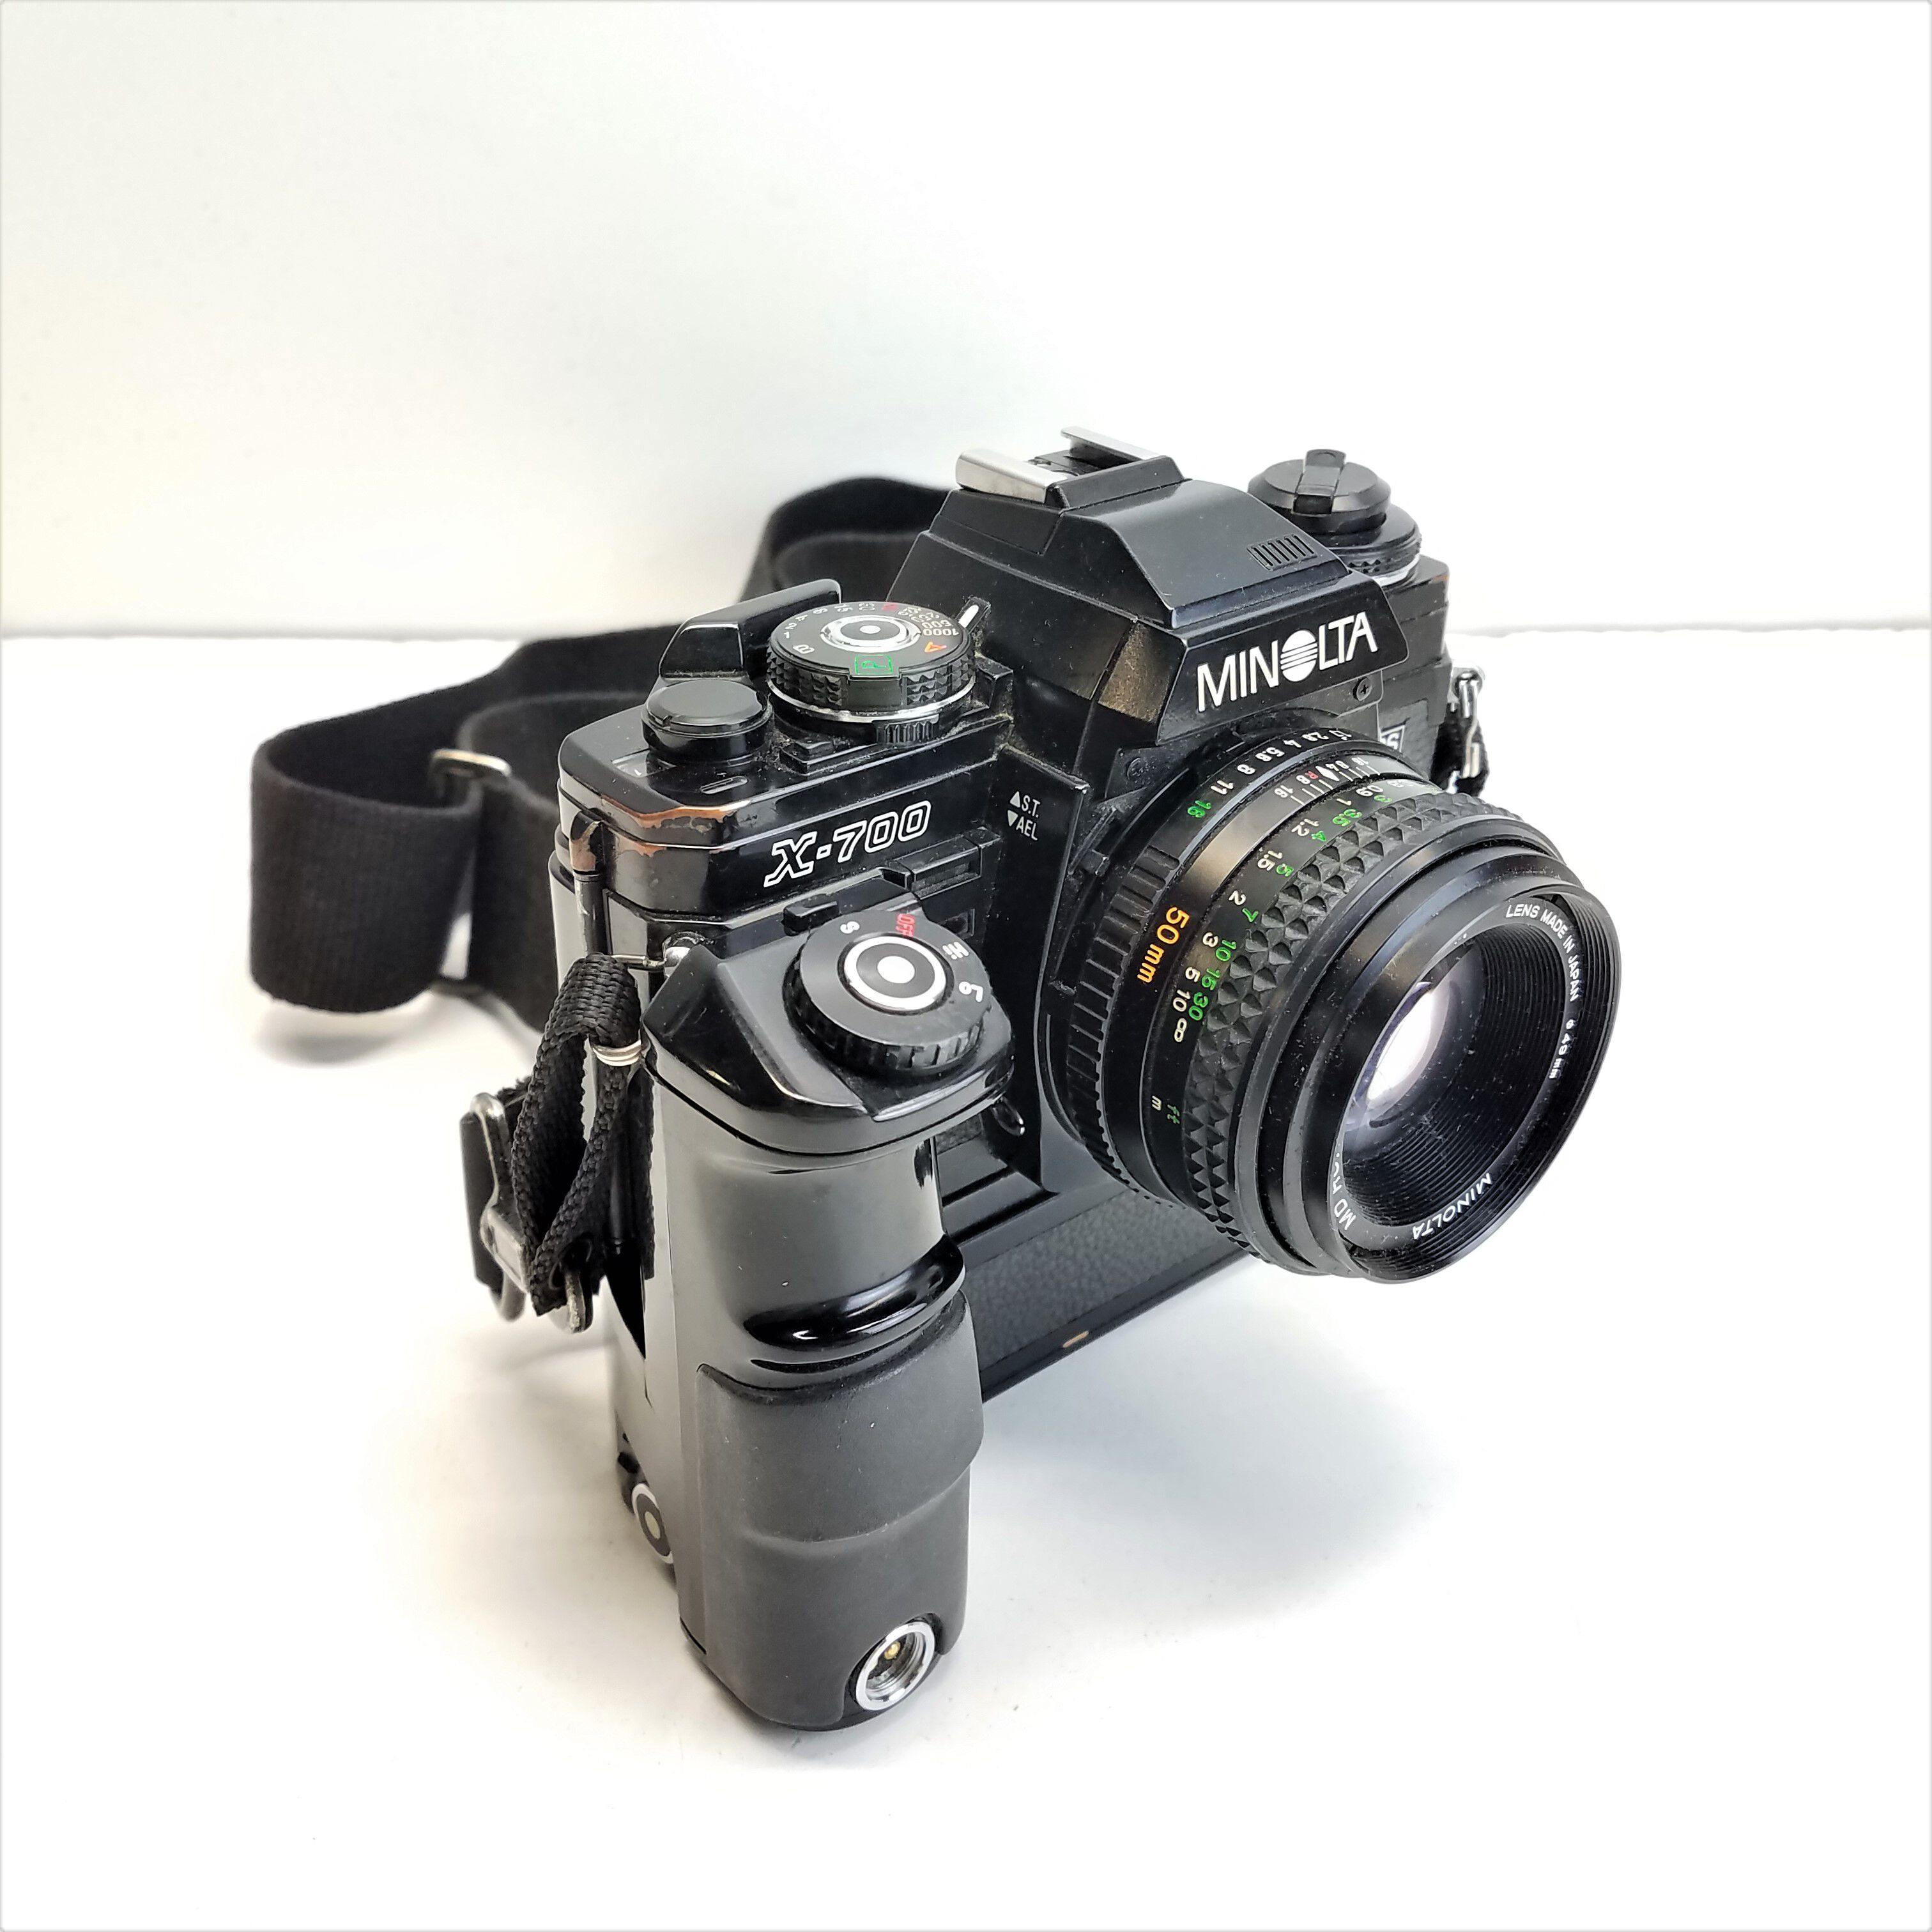 Minolta X-700 35mm SLR Camera with 50mm f1.7 Lens and Motor Drive